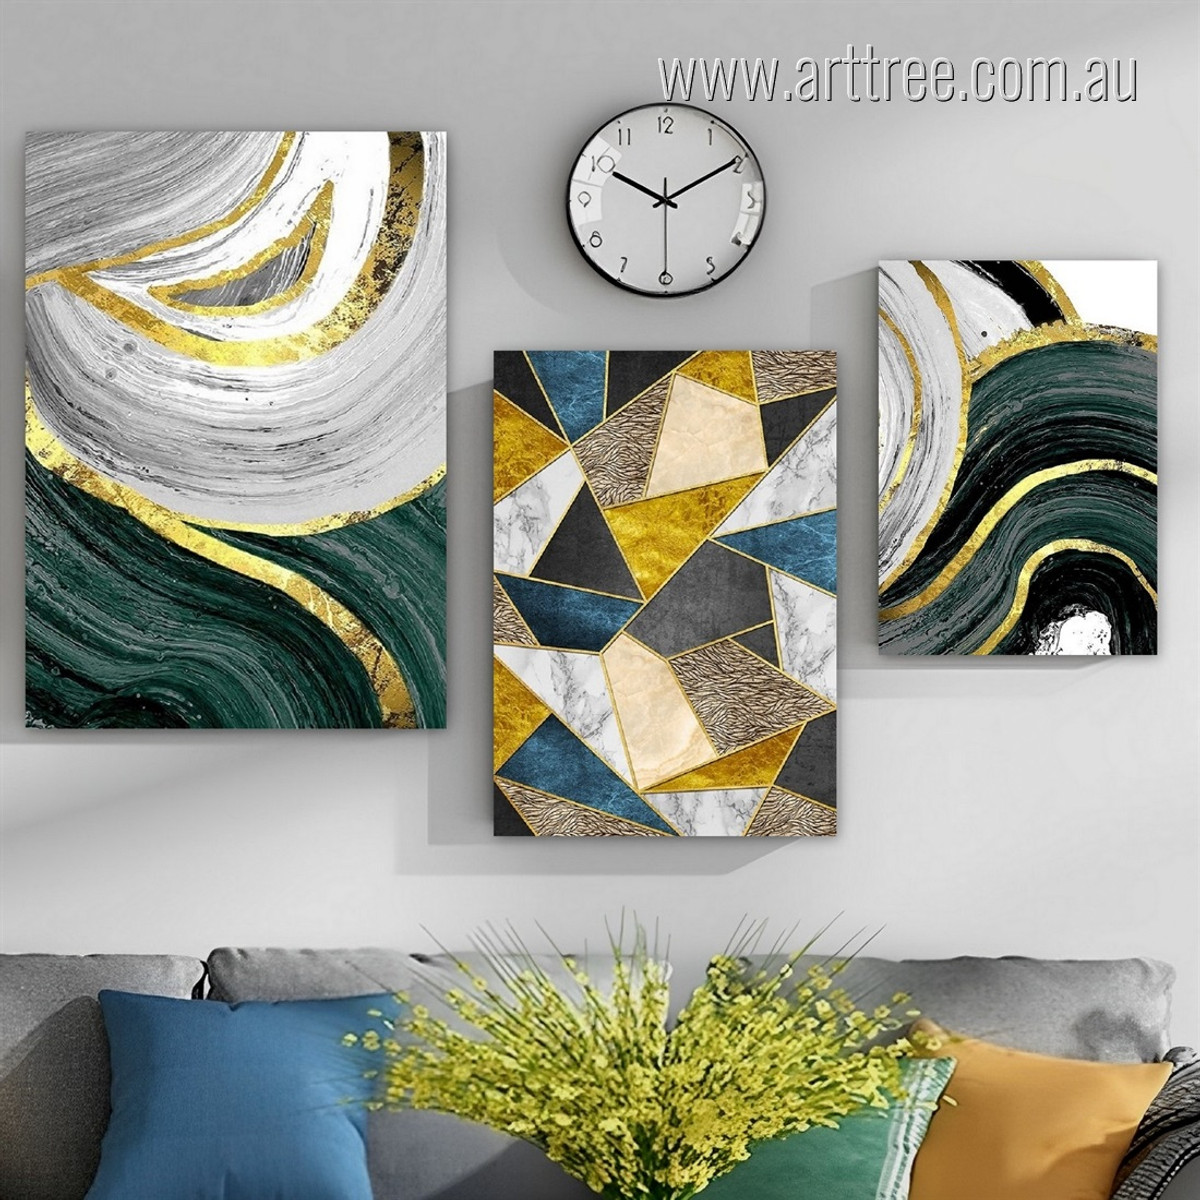 Taint Trigon Marble Curved Lines Modern Photograph Abstract 3 Piece Geometrical Wall Set Canvas Print Stretched Artwork For Room Arrangement